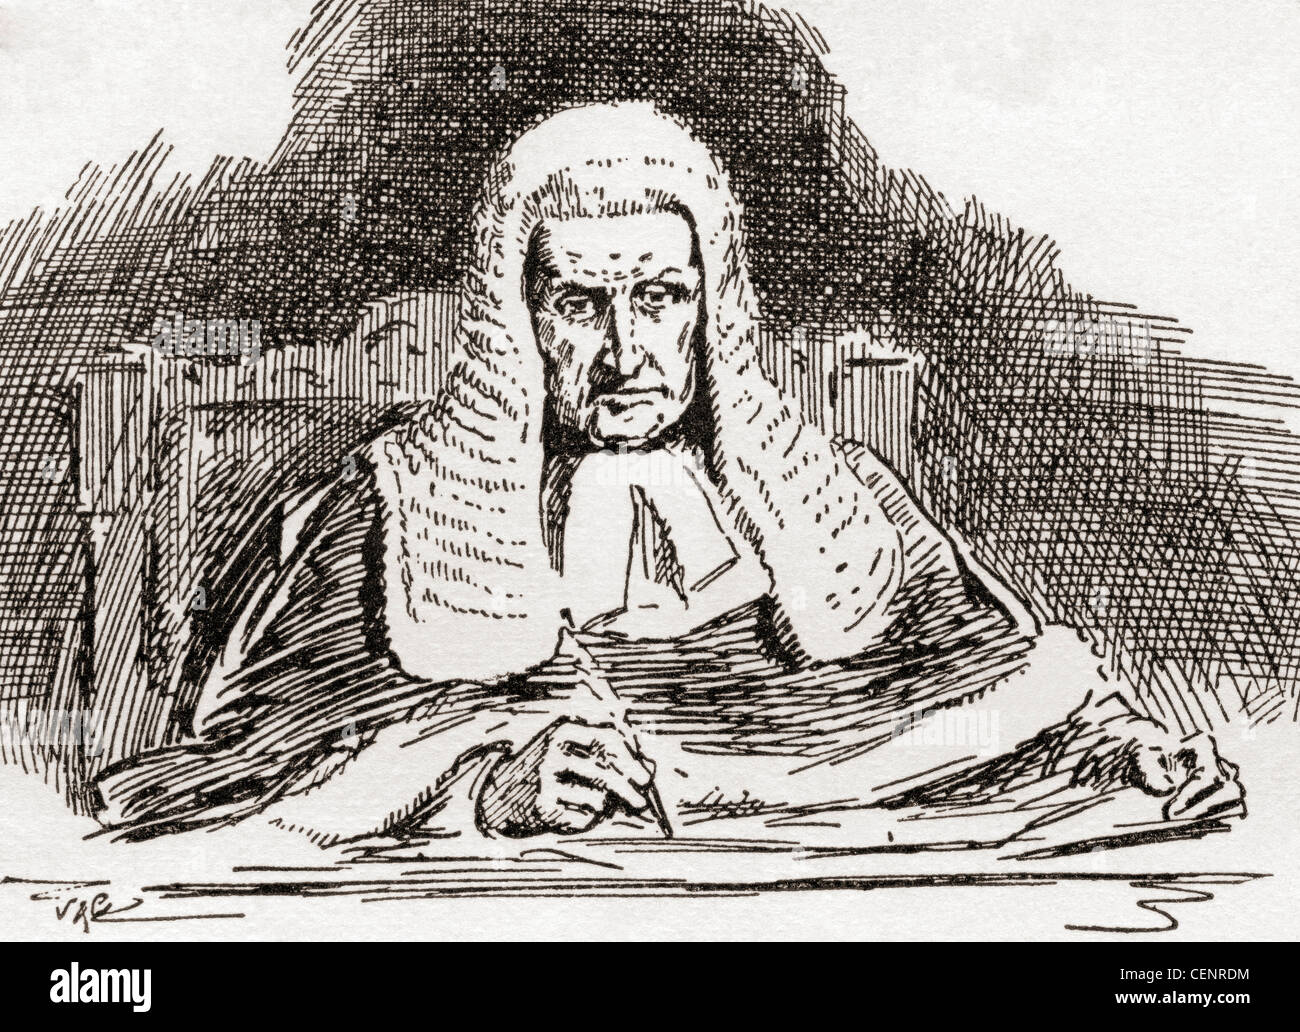 A 19th century Old Bailey judge. Stock Photo